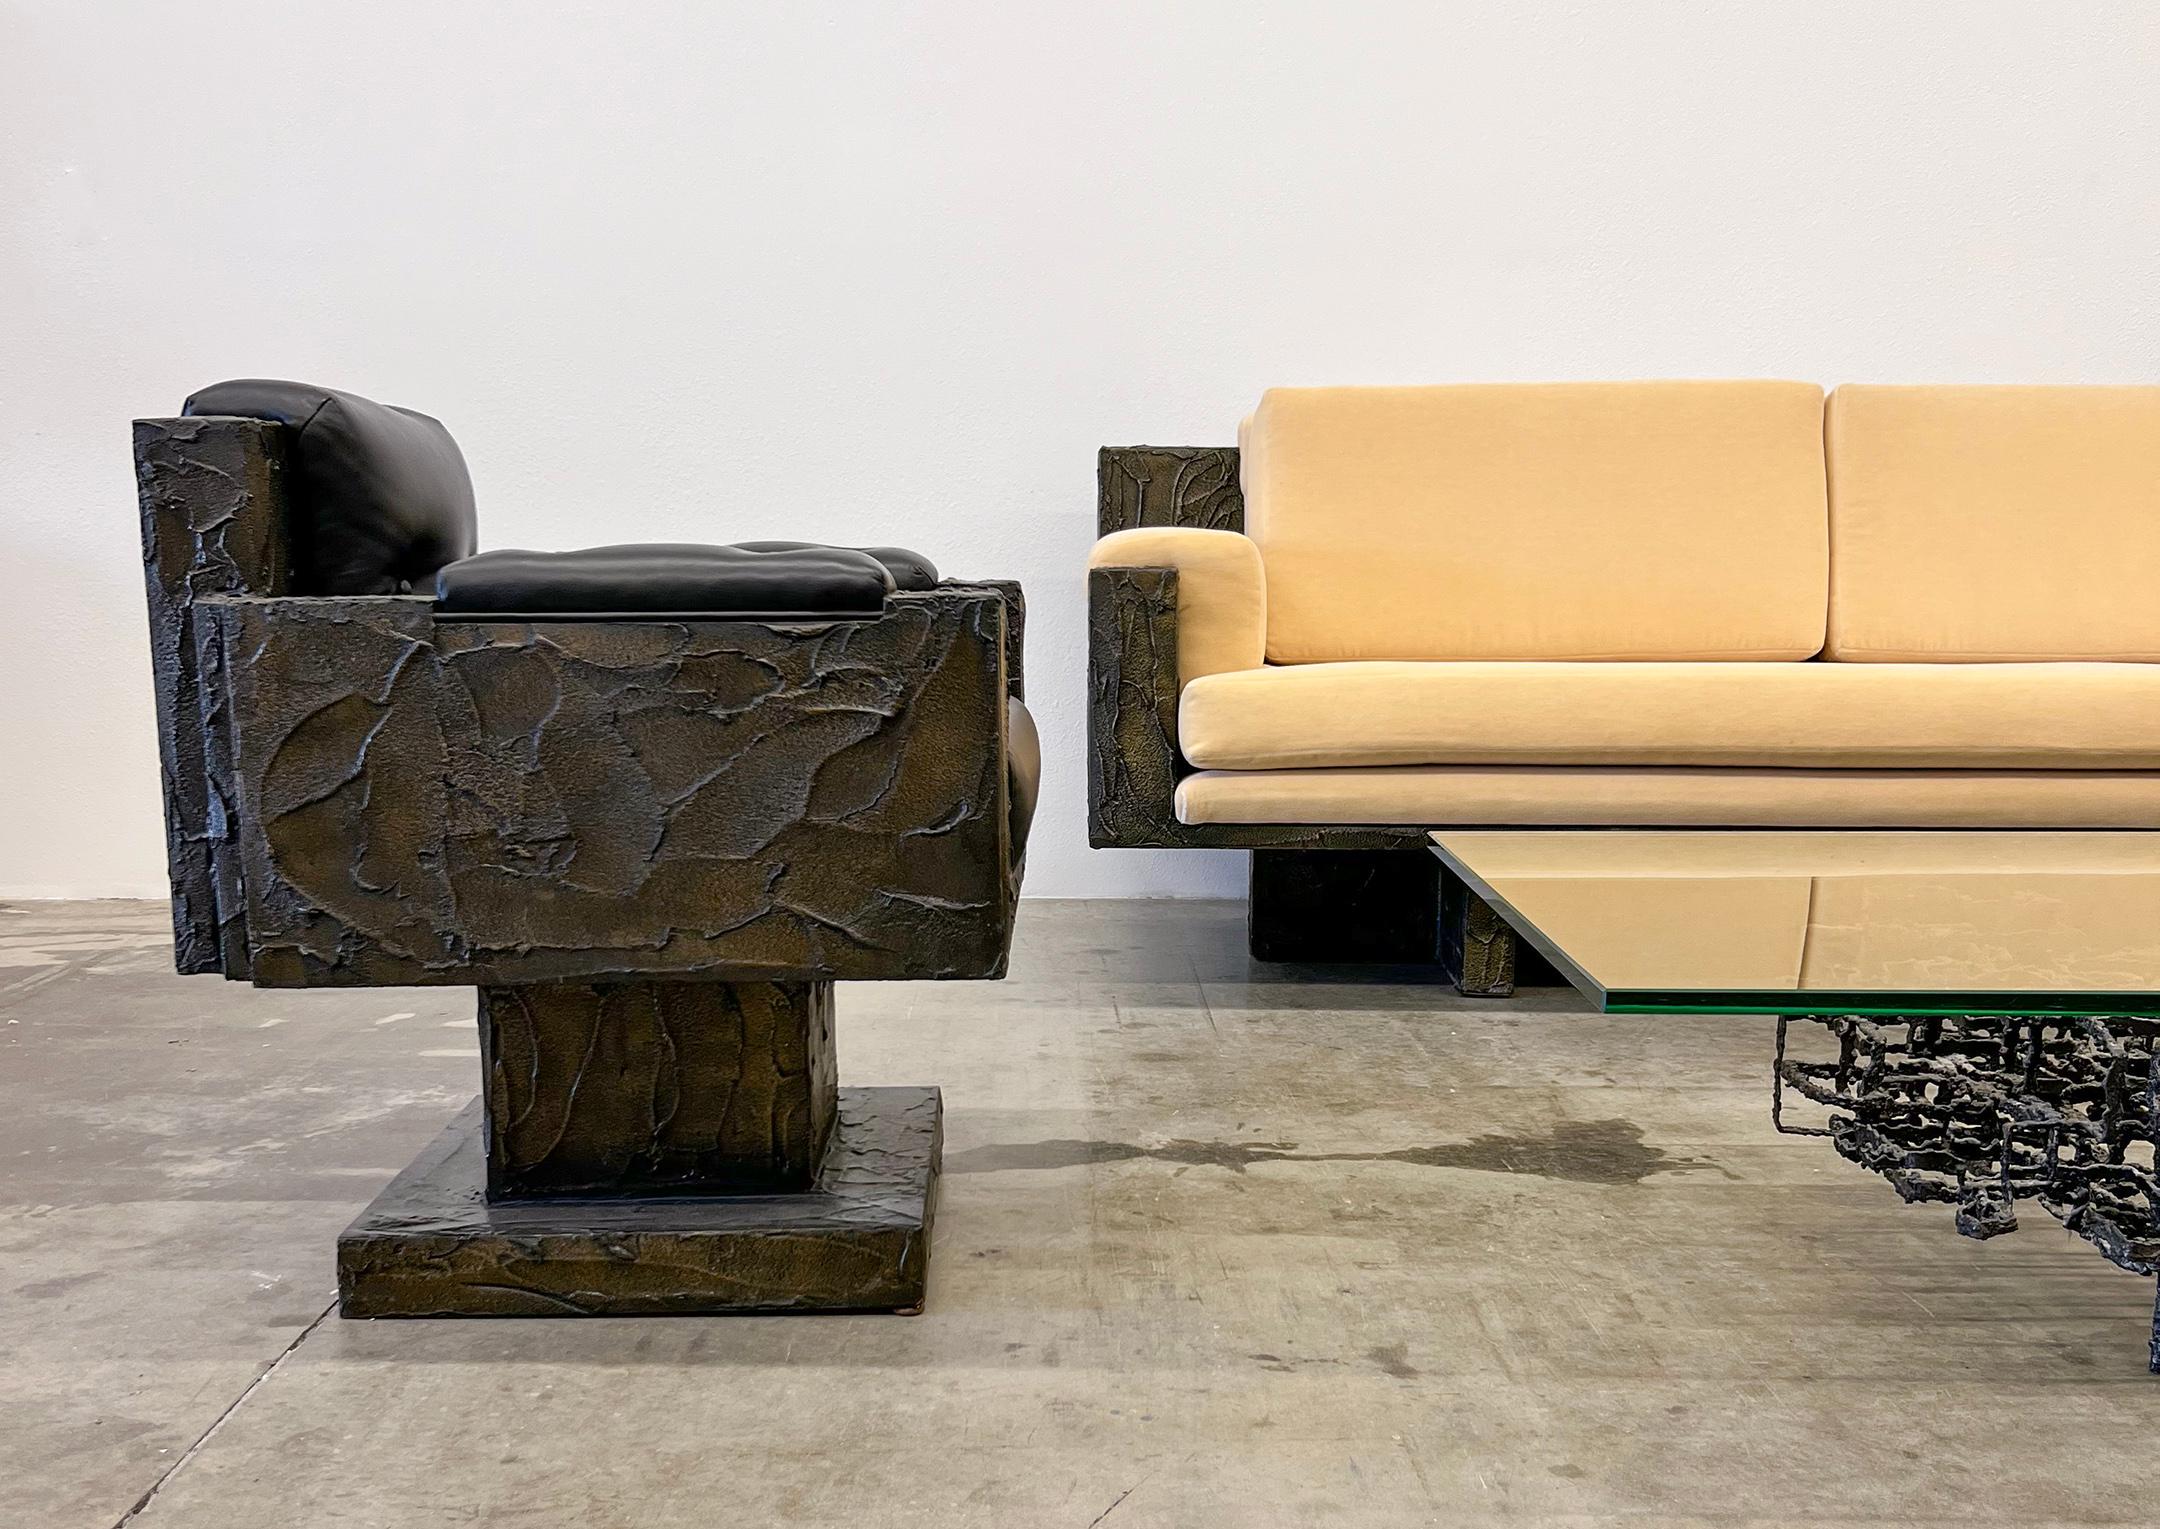 Important Paul Evans Studio Sculpted Bronze and Resin Sofa, Signed, 1971 For Sale 5